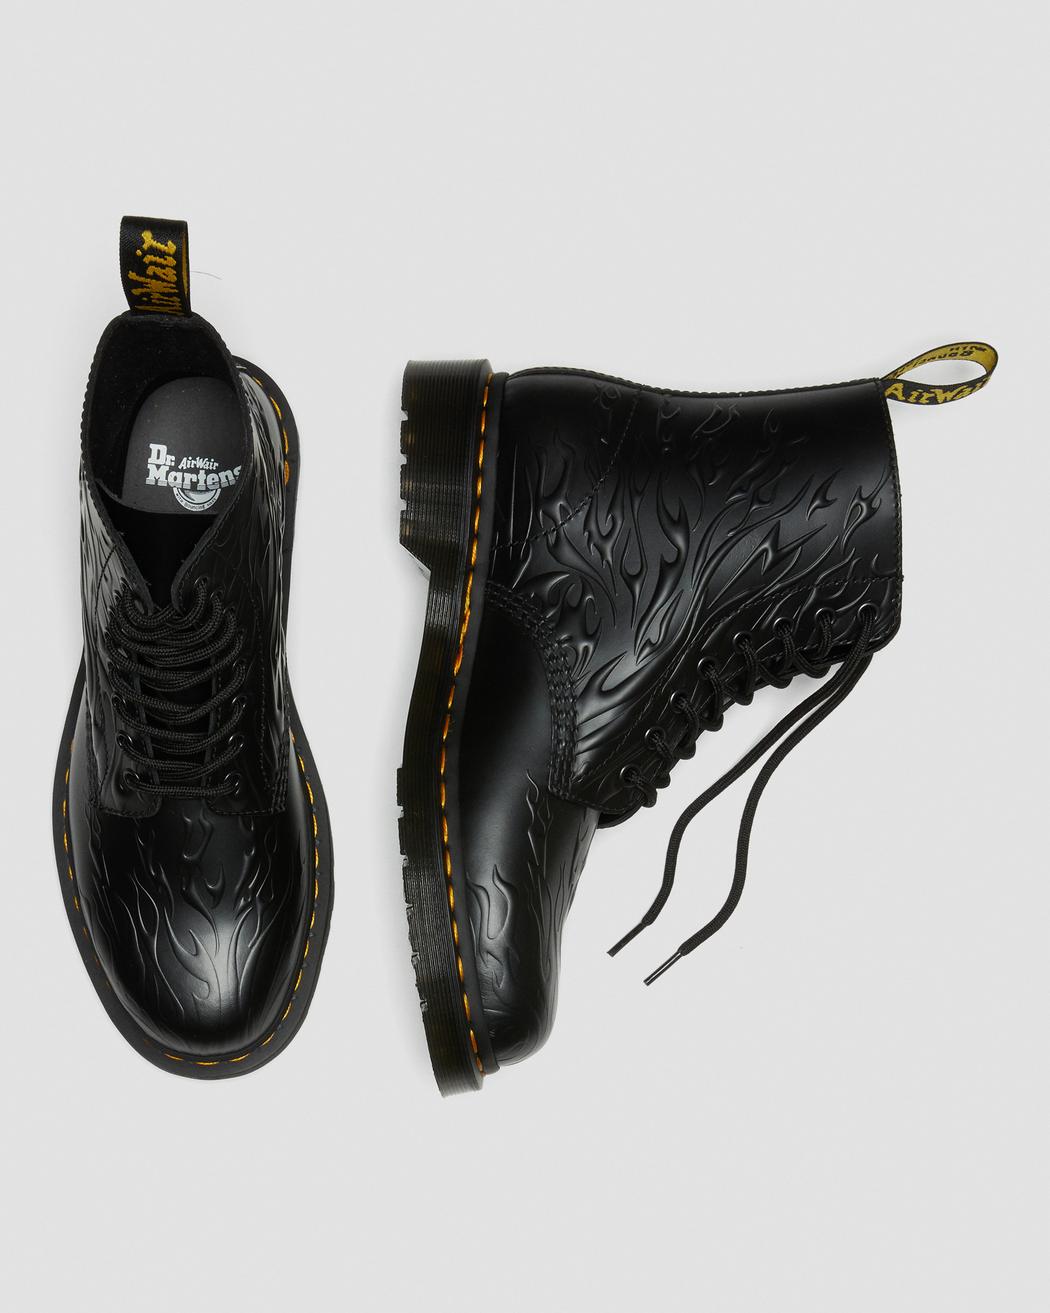 1460 FLAMES BLACK FLAME POLISHED SMOOTH BOOT